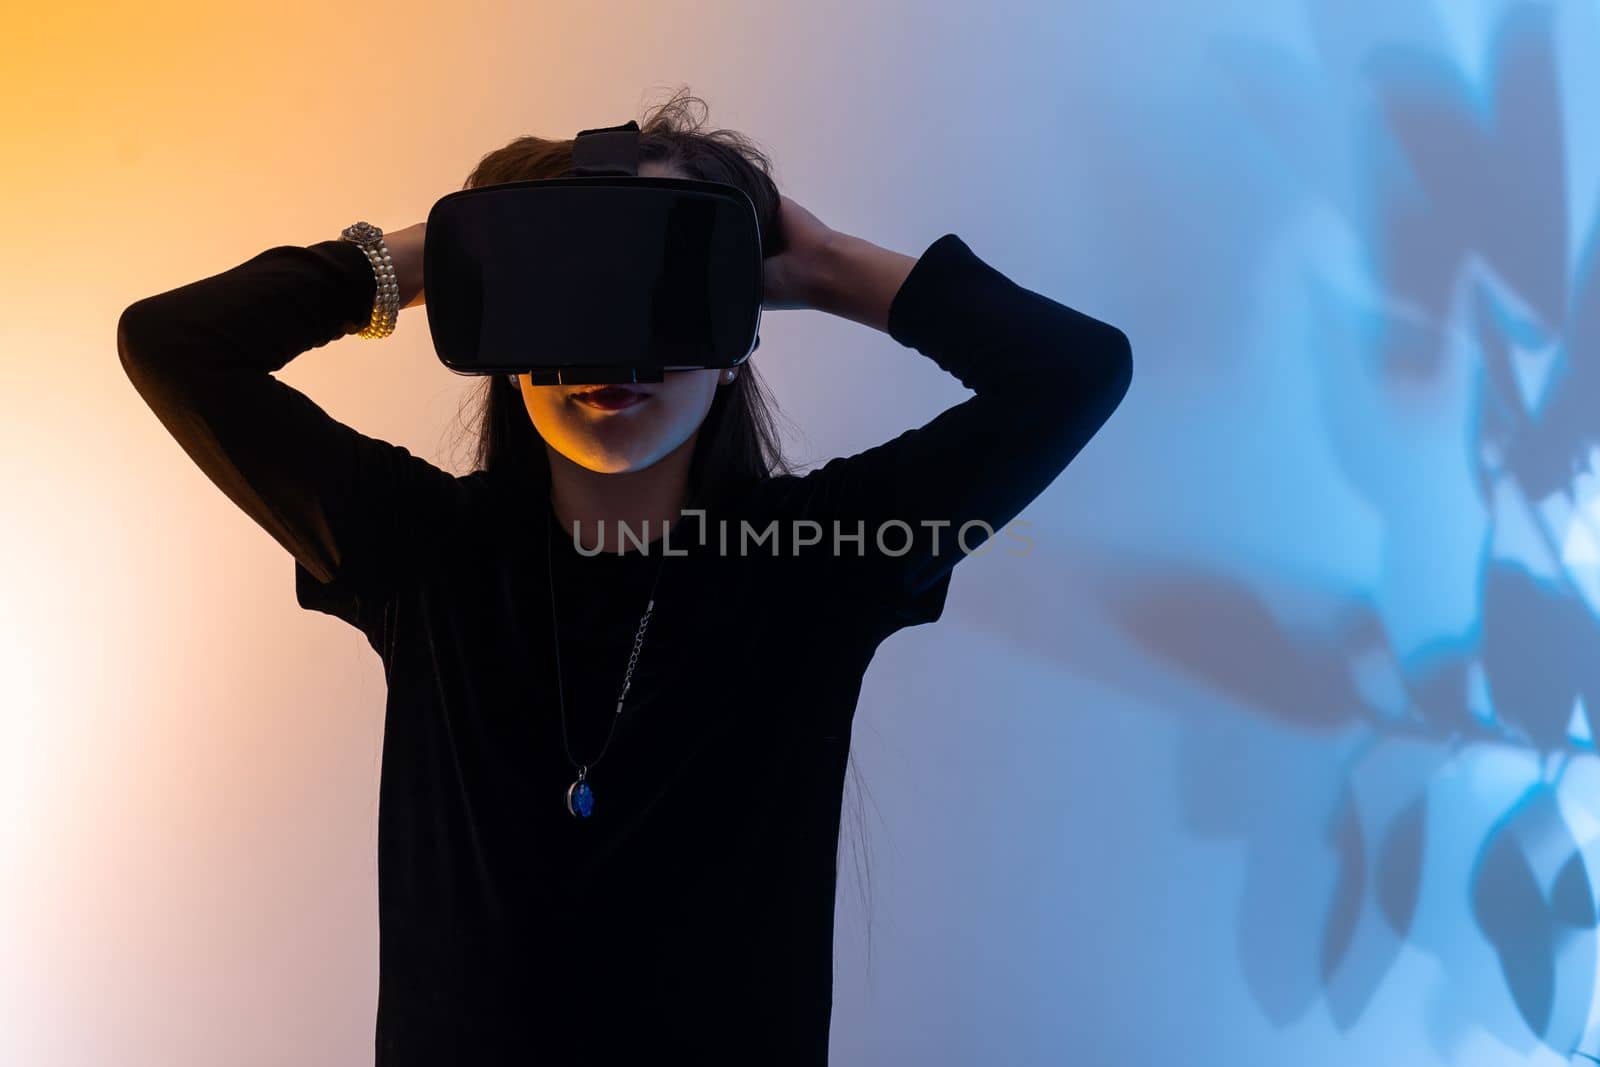 Teenage girls are having fun playing VR glasses virtual reality metaverse playing games, watching movies, listening to music, shopping. Colorful neon futuristic backgrounds, digital future technology